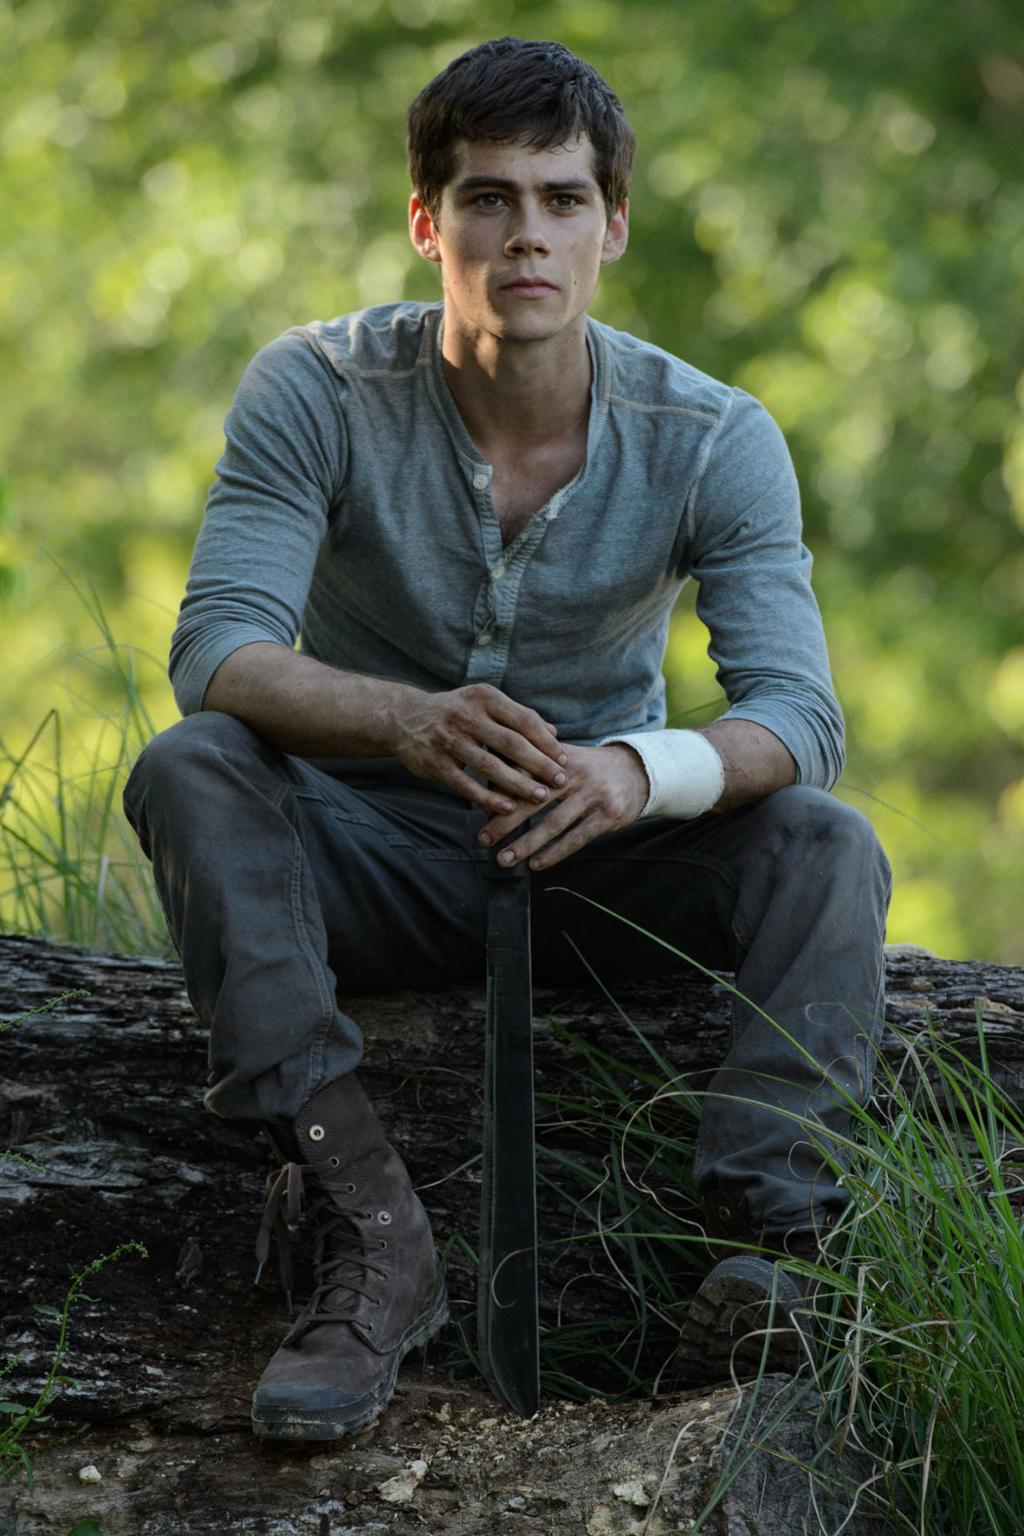 The Maze Runner Review